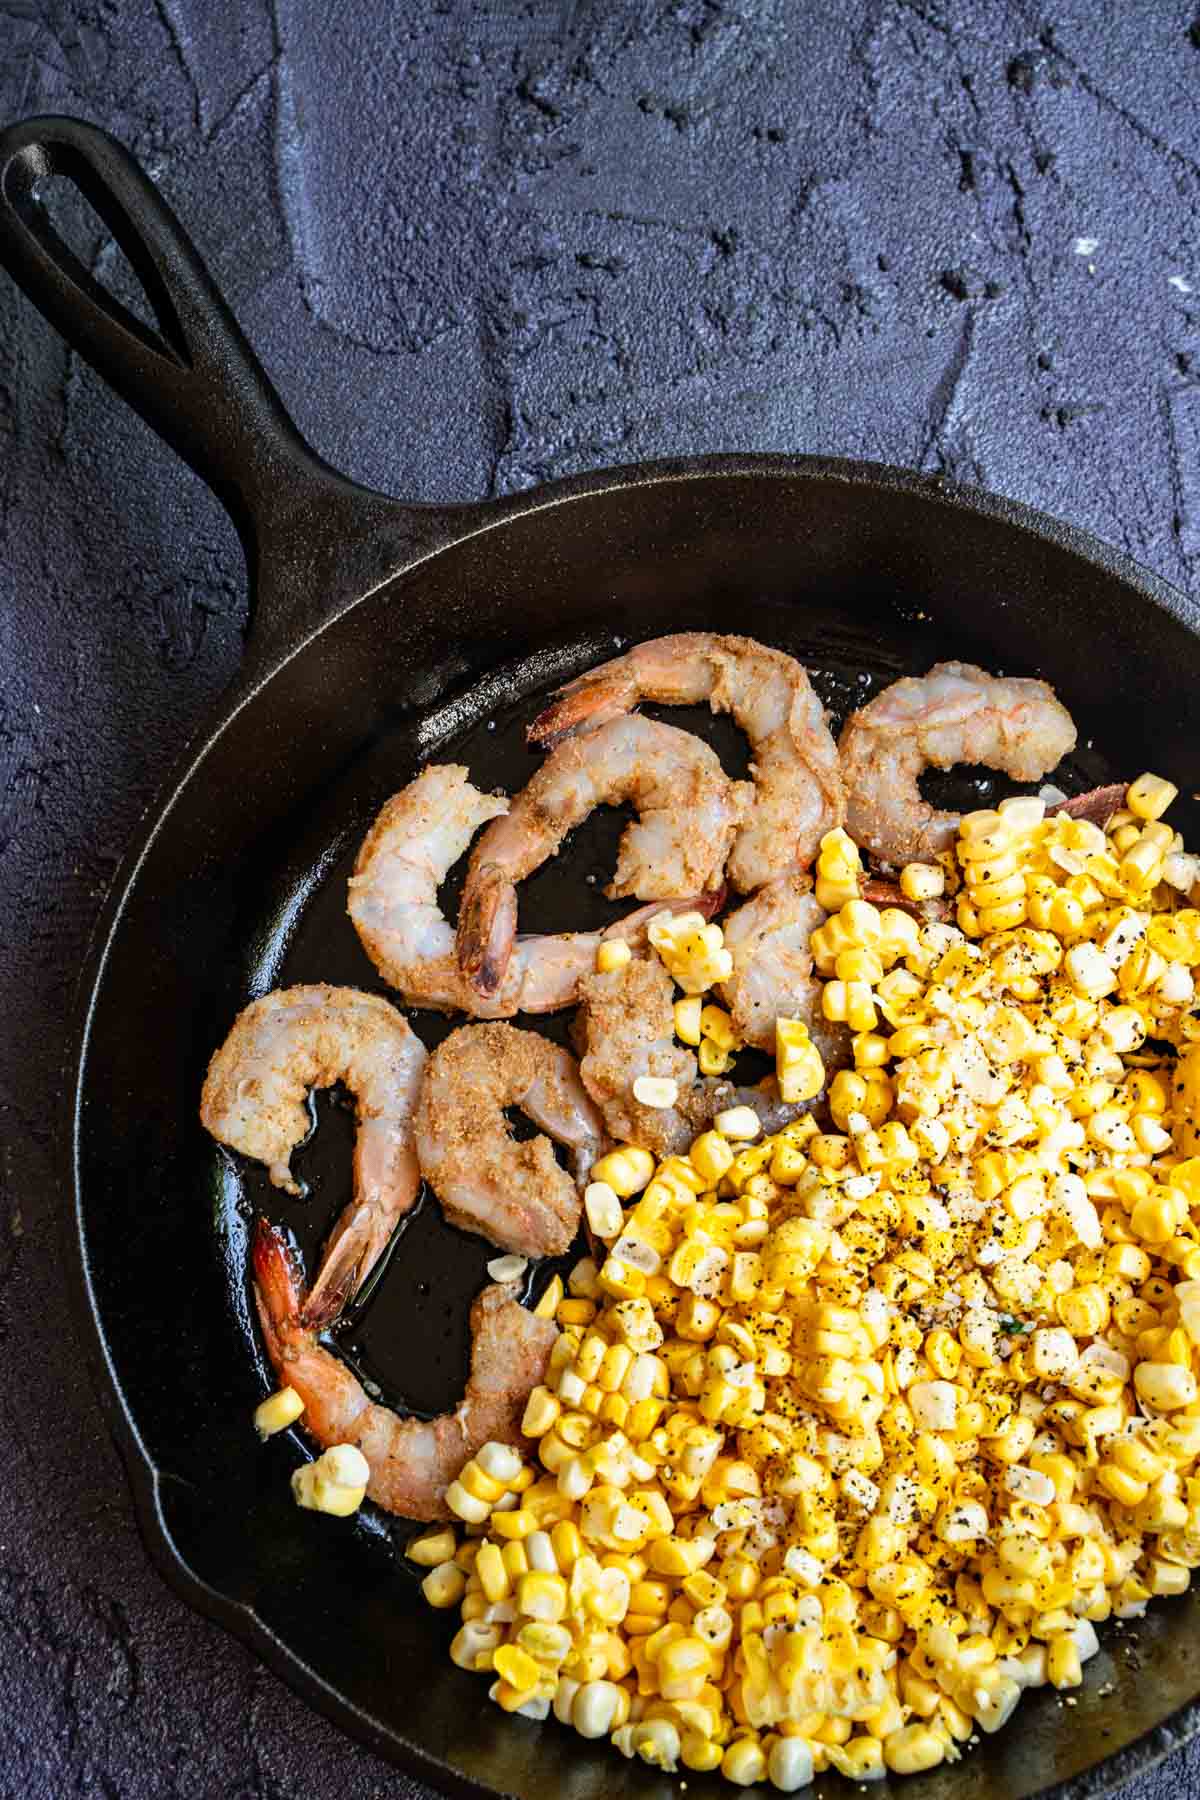 shrimp in an even layer on one side of the pan and corn on the other side.